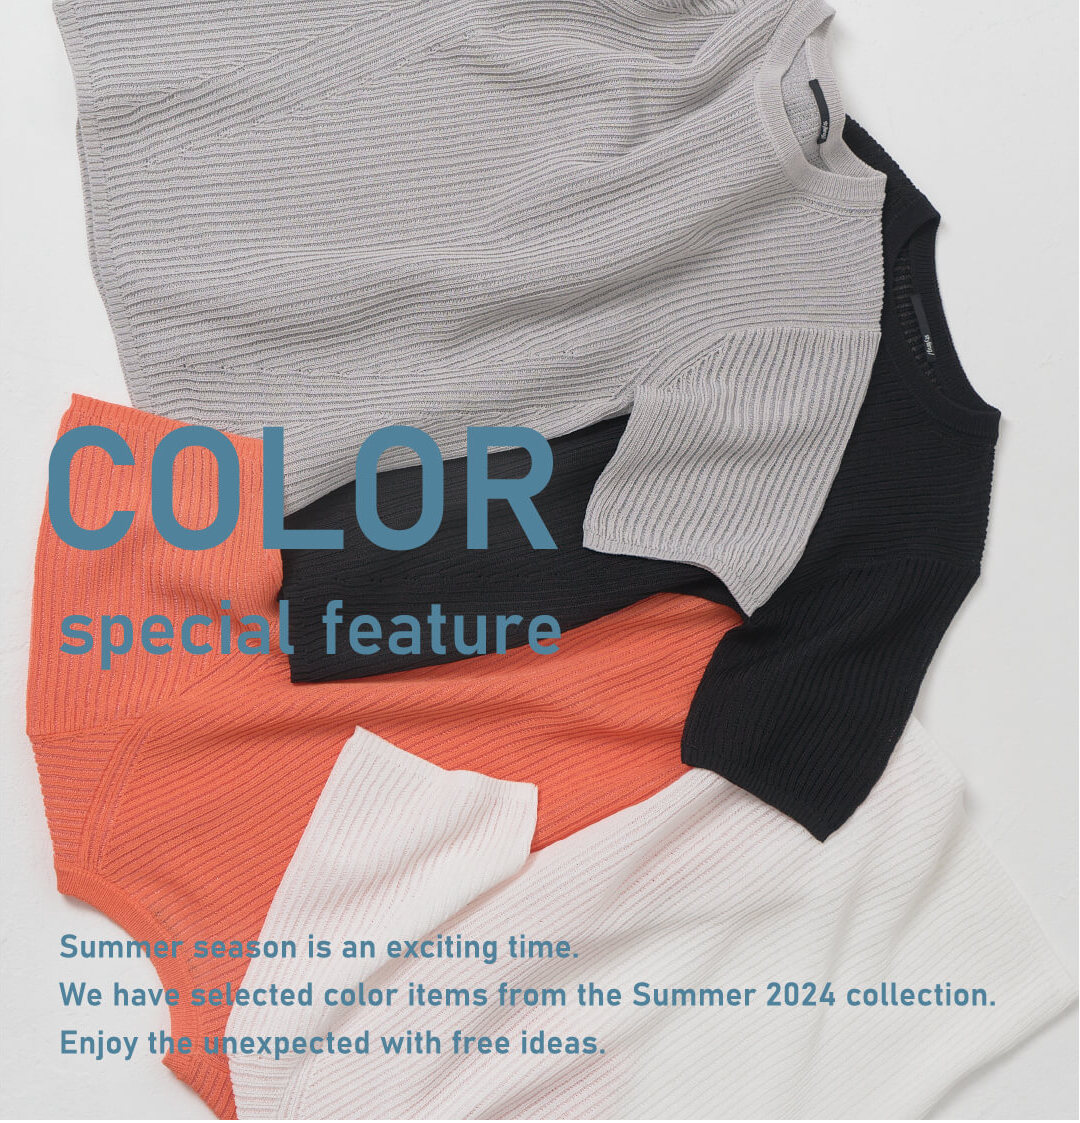 COLOR special featureSummer season is an exciting time. We have selected color items from the Summer 2024 collection. Enjoy the unexpected with free ideas.